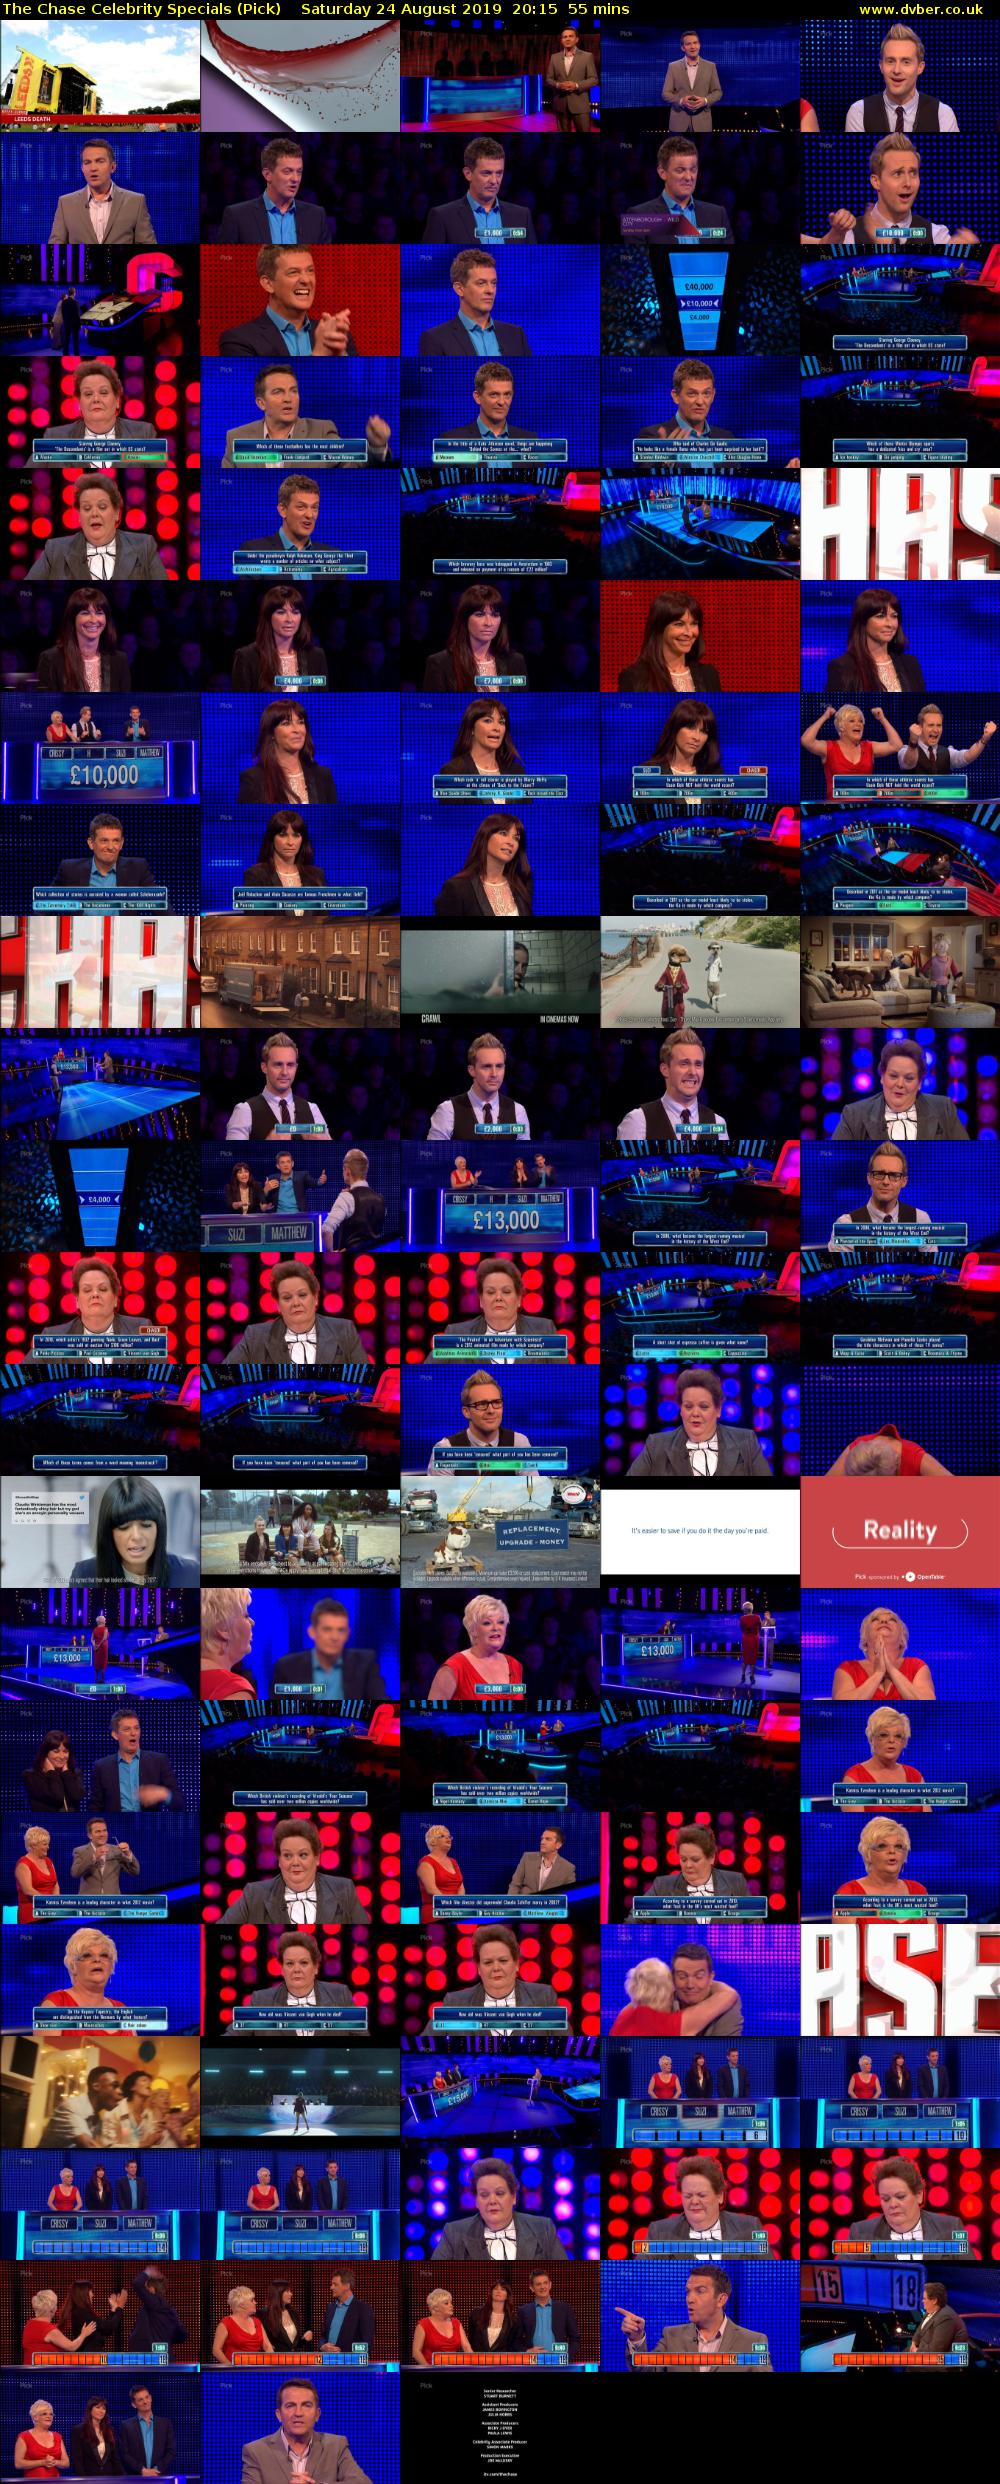 The Chase Celebrity Specials (Pick) Saturday 24 August 2019 20:15 - 21:10